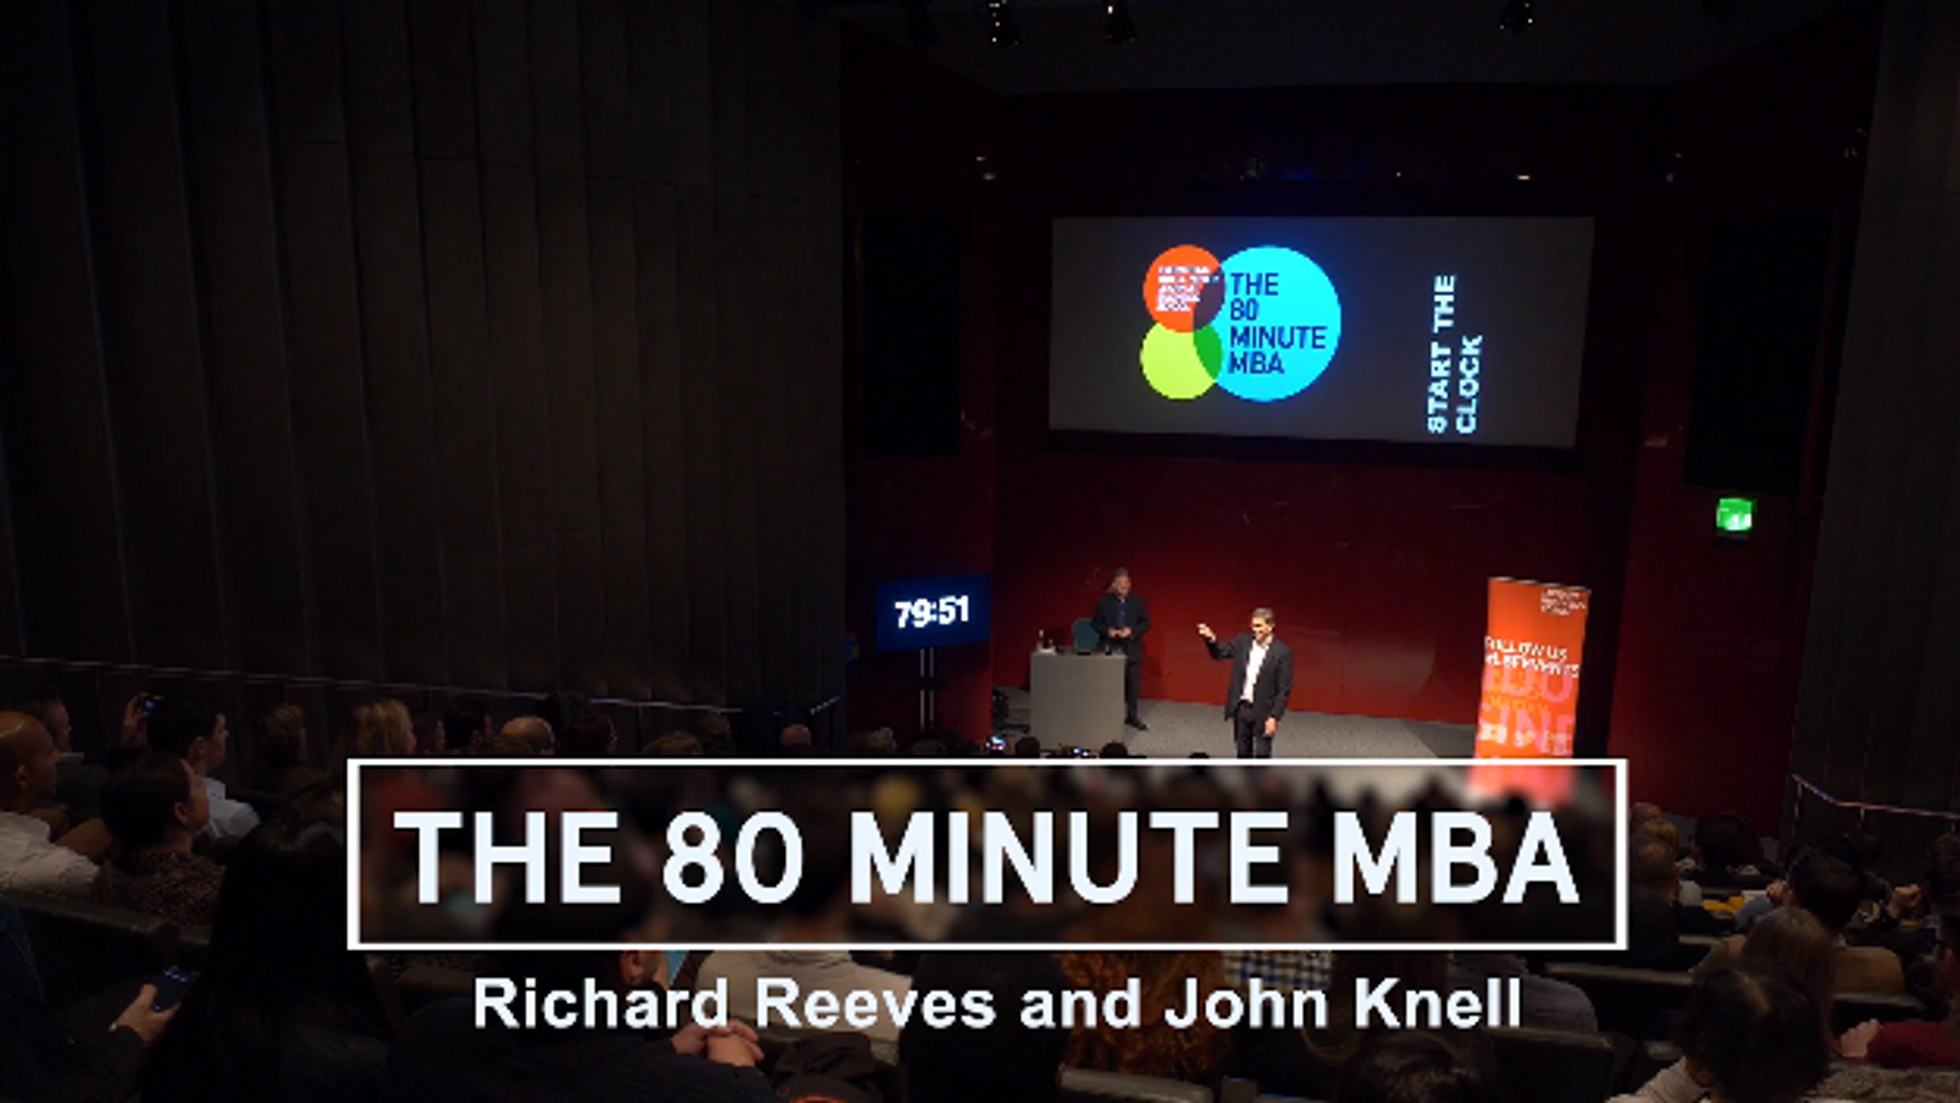 Richard Reeves & John Knell - The 80 Minute MBA